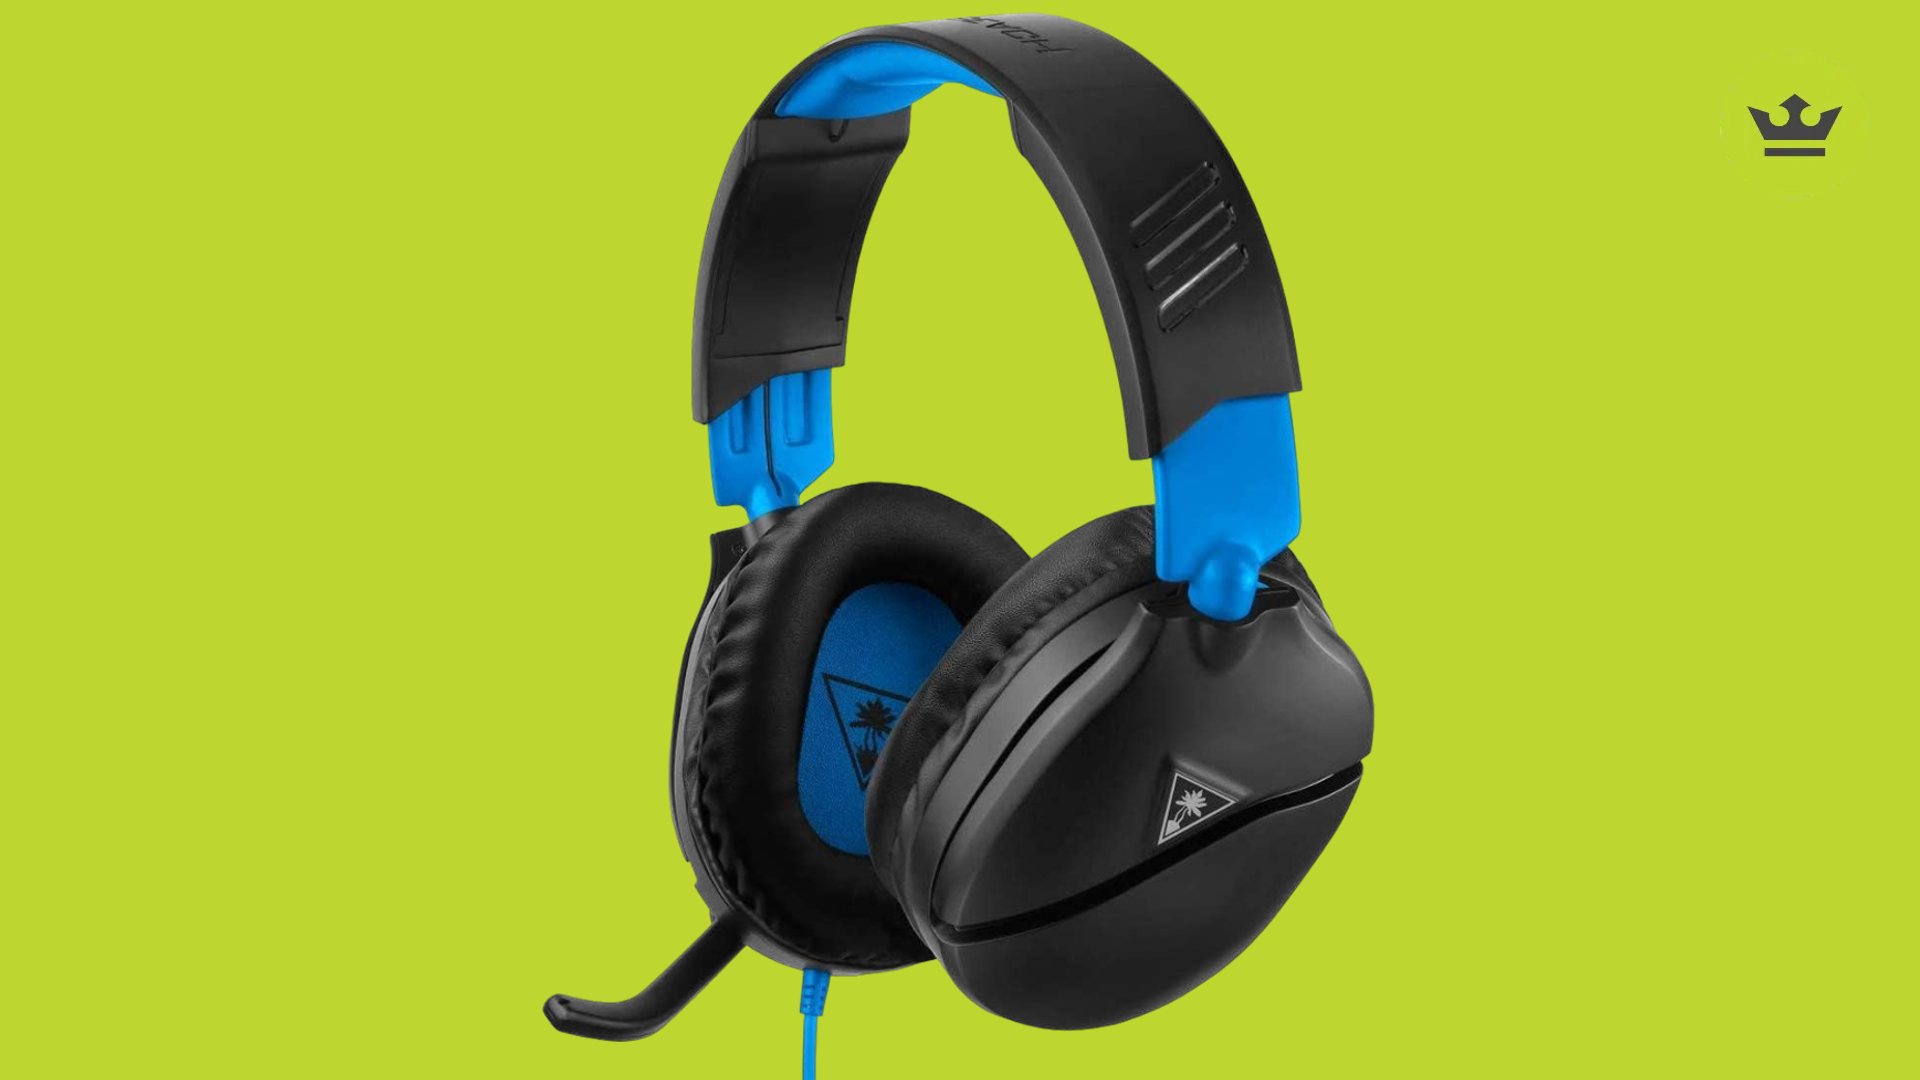 Best Cheap Gaming Headsets: The Turtle Beach Recon 70 can be seen